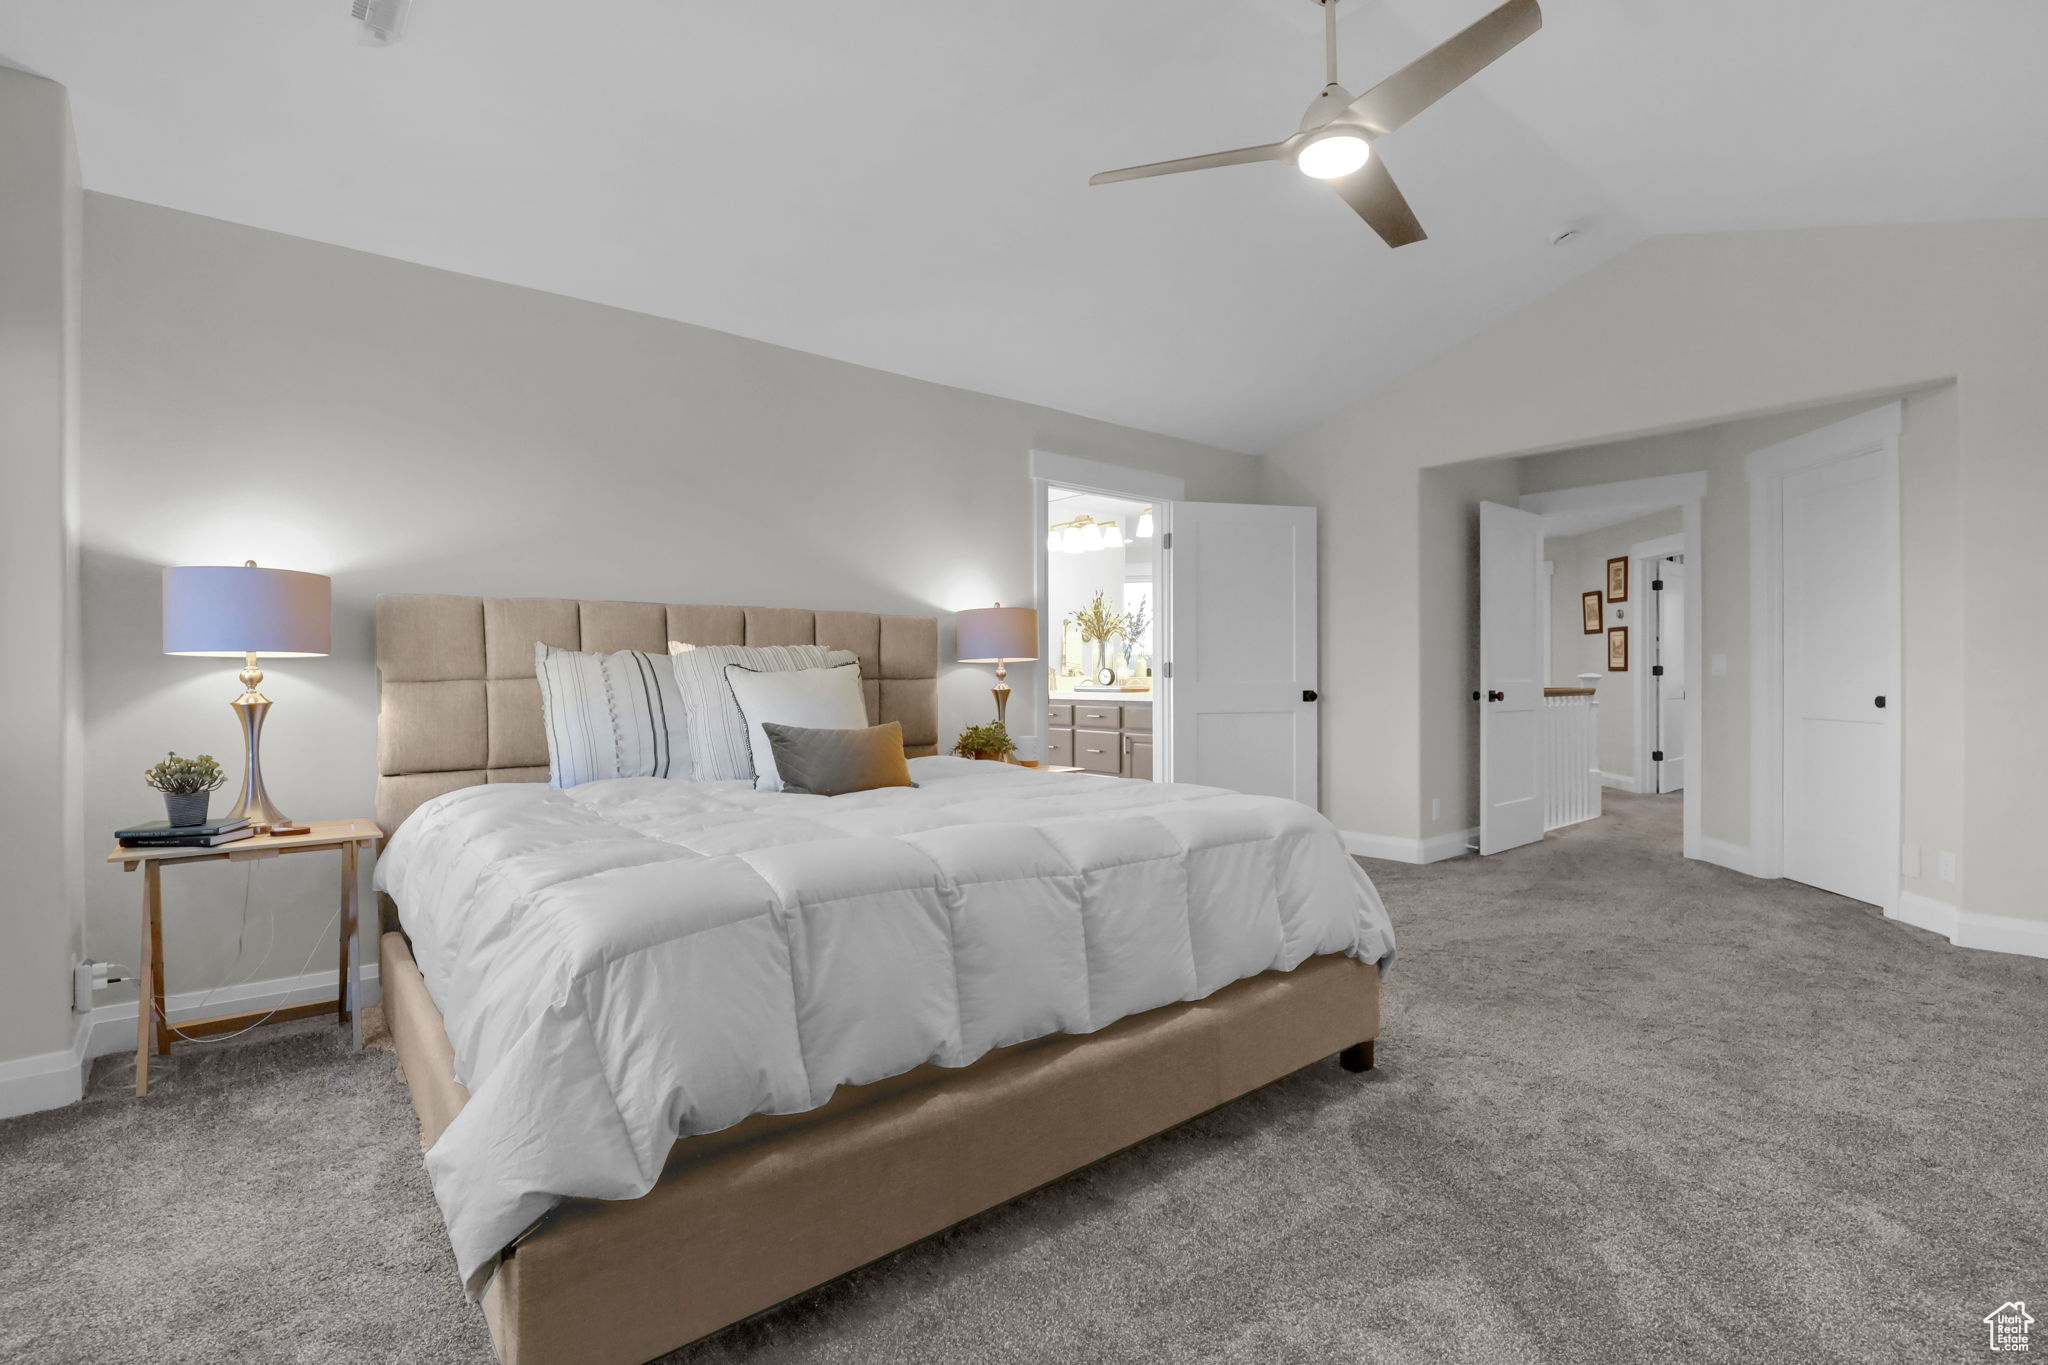 Carpeted bedroom with ceiling fan, vaulted ceiling, and connected bathroom